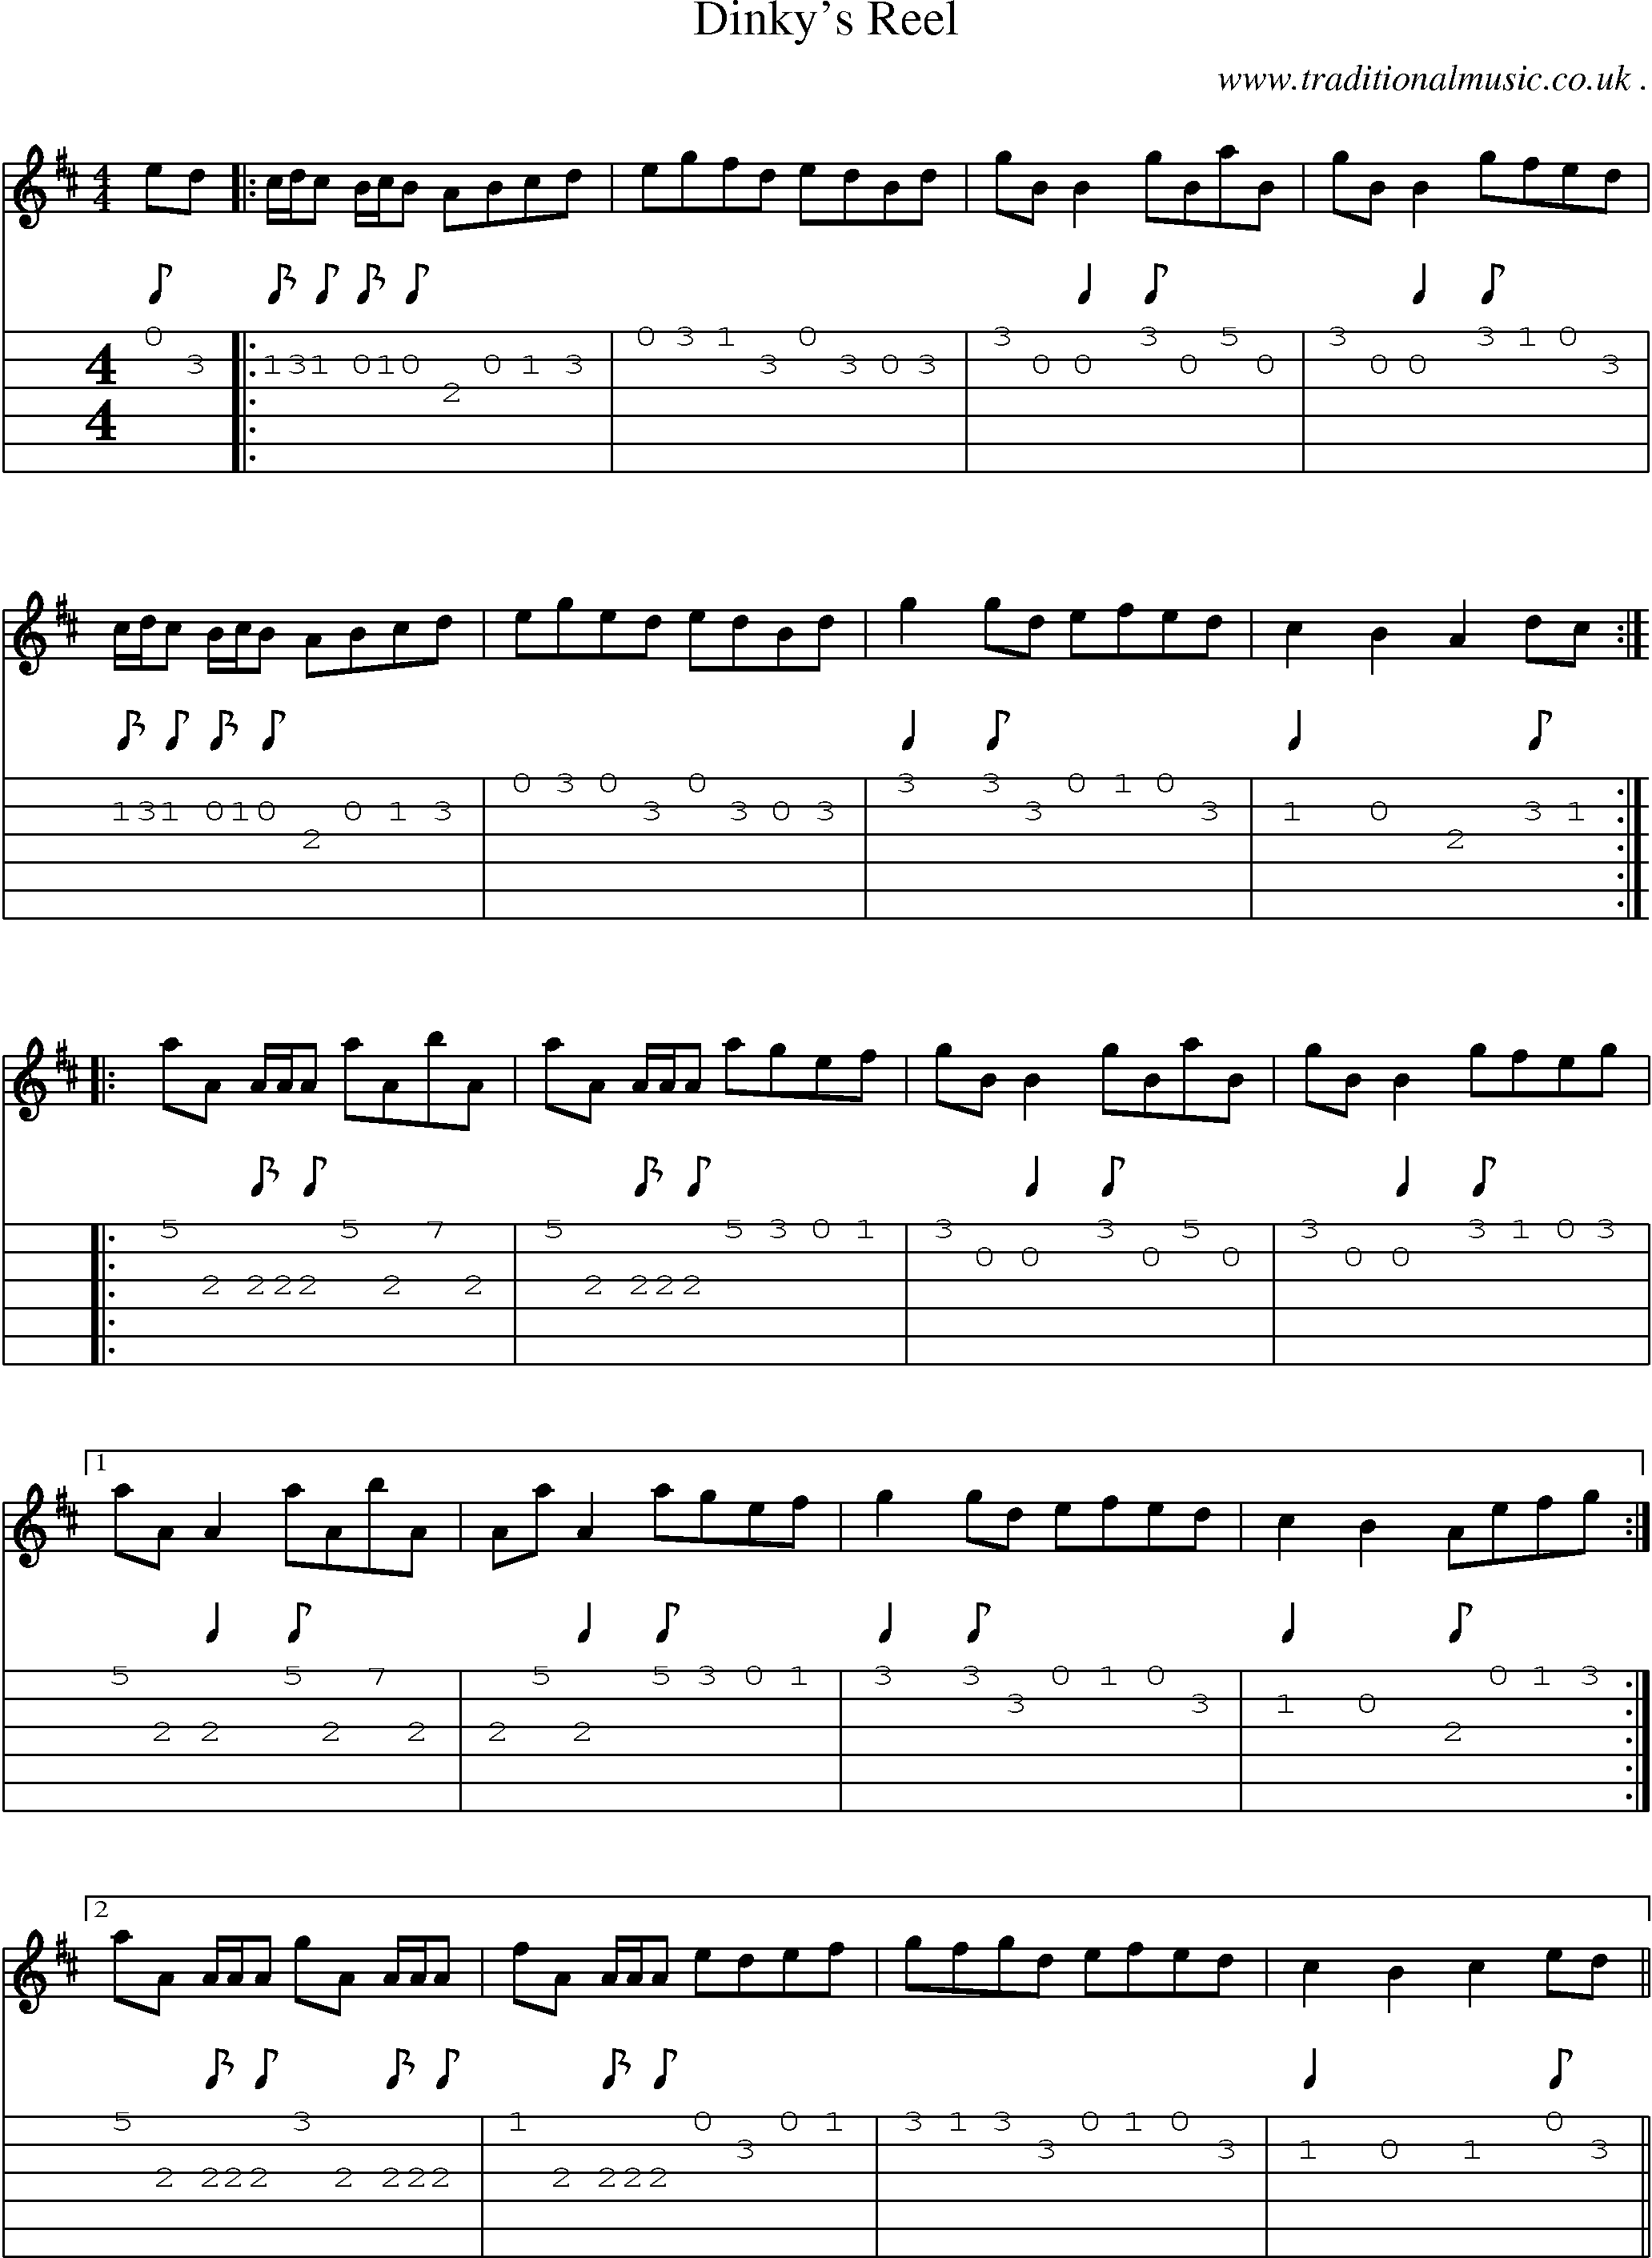 Sheet-Music and Guitar Tabs for Dinkys Reel